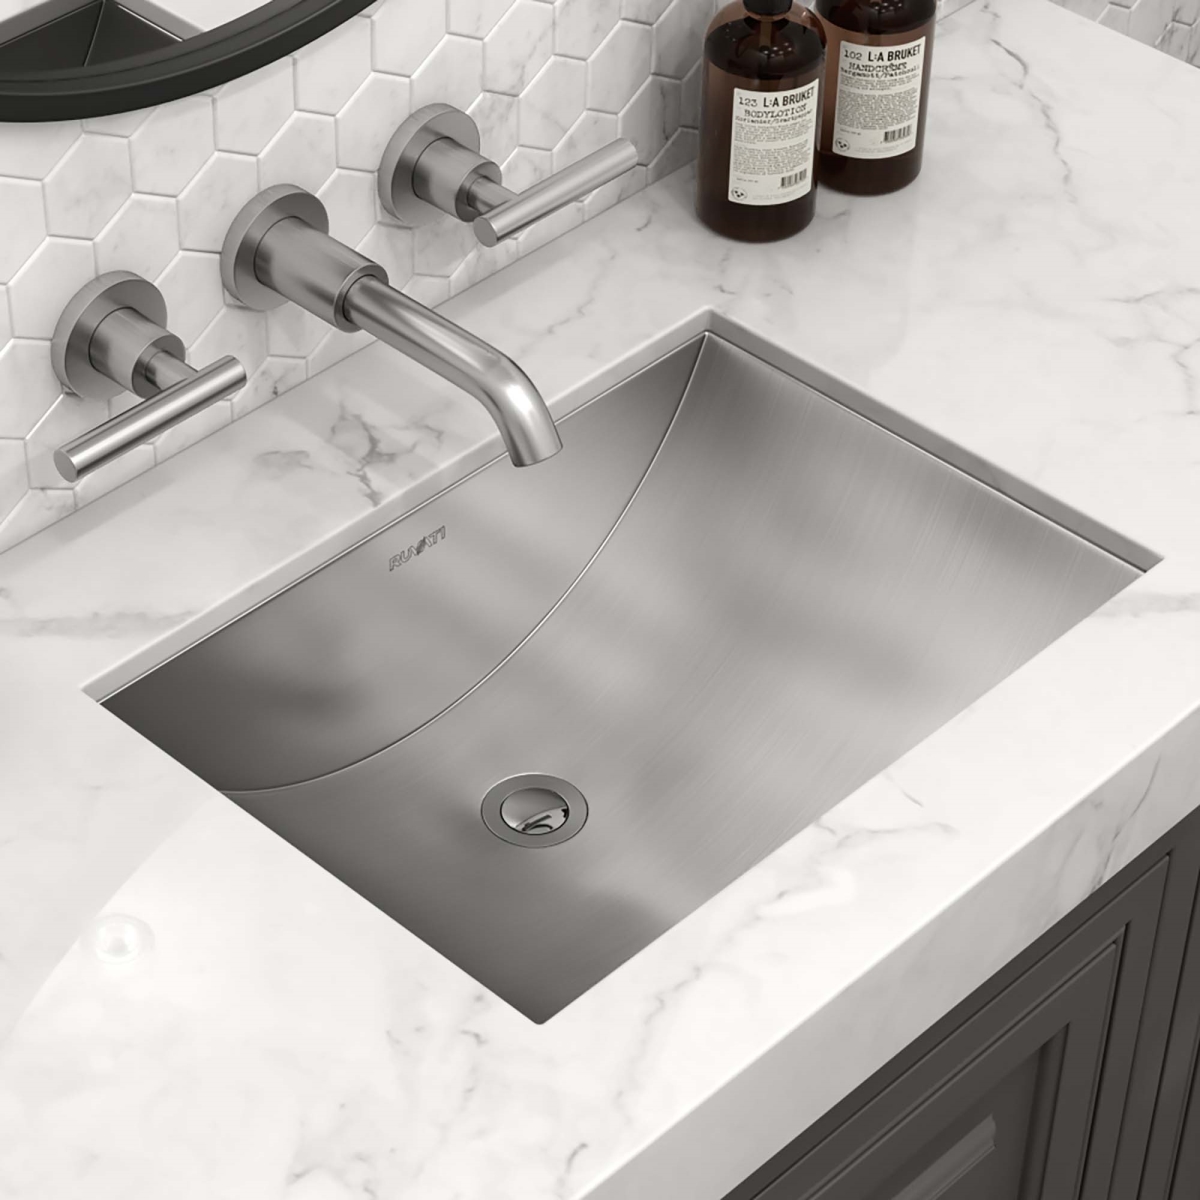 Made-to-Order 16 x 11 in. Brushed Stainless Steel Rectangular Undermount Bathroom Sink